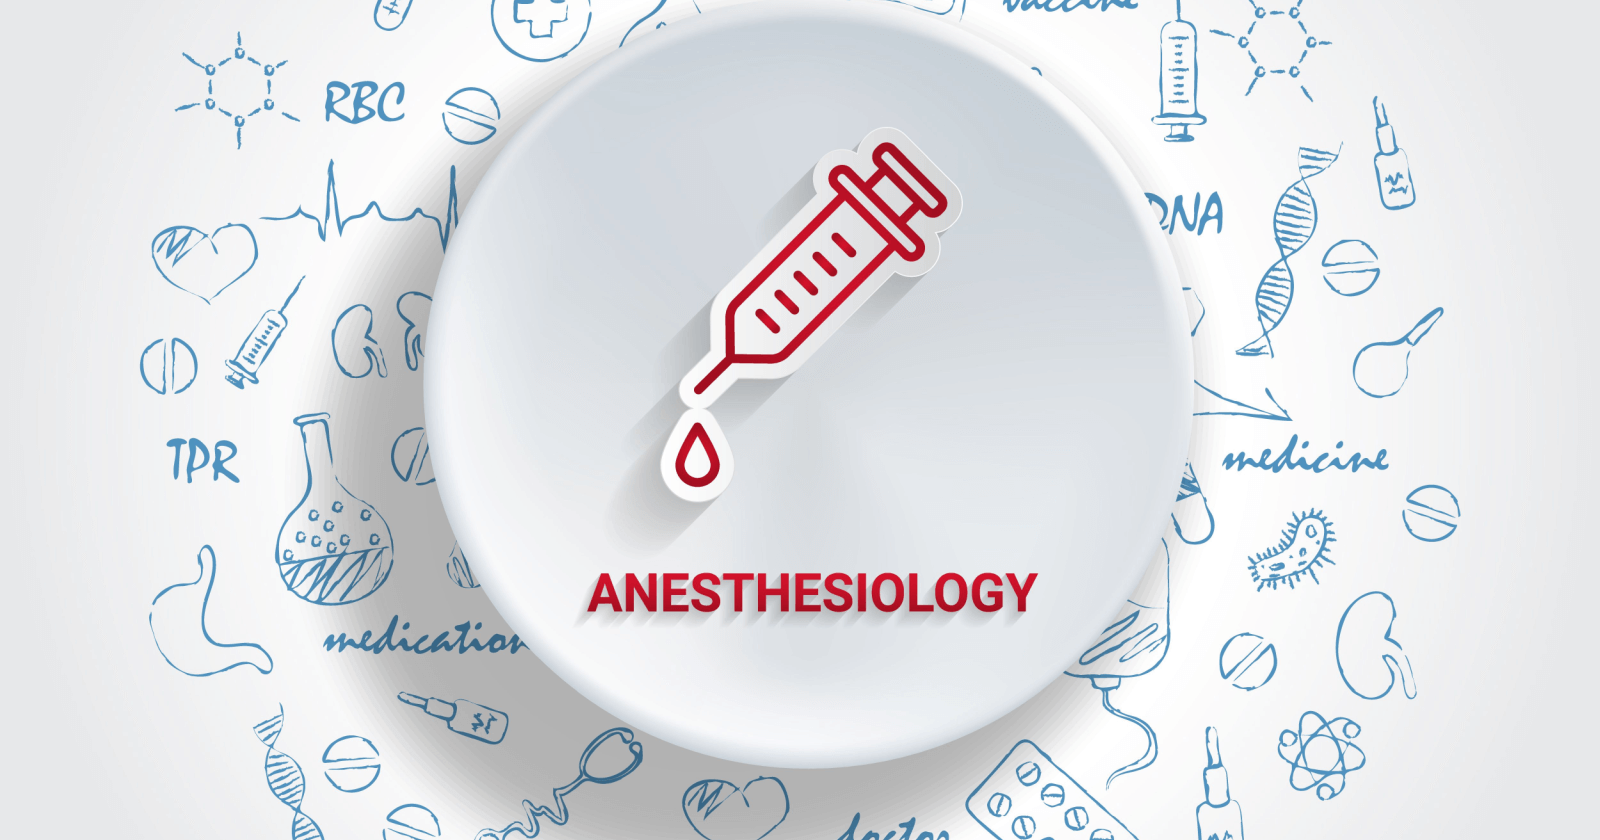 Anesthesiology: Meaning, Types, and other details